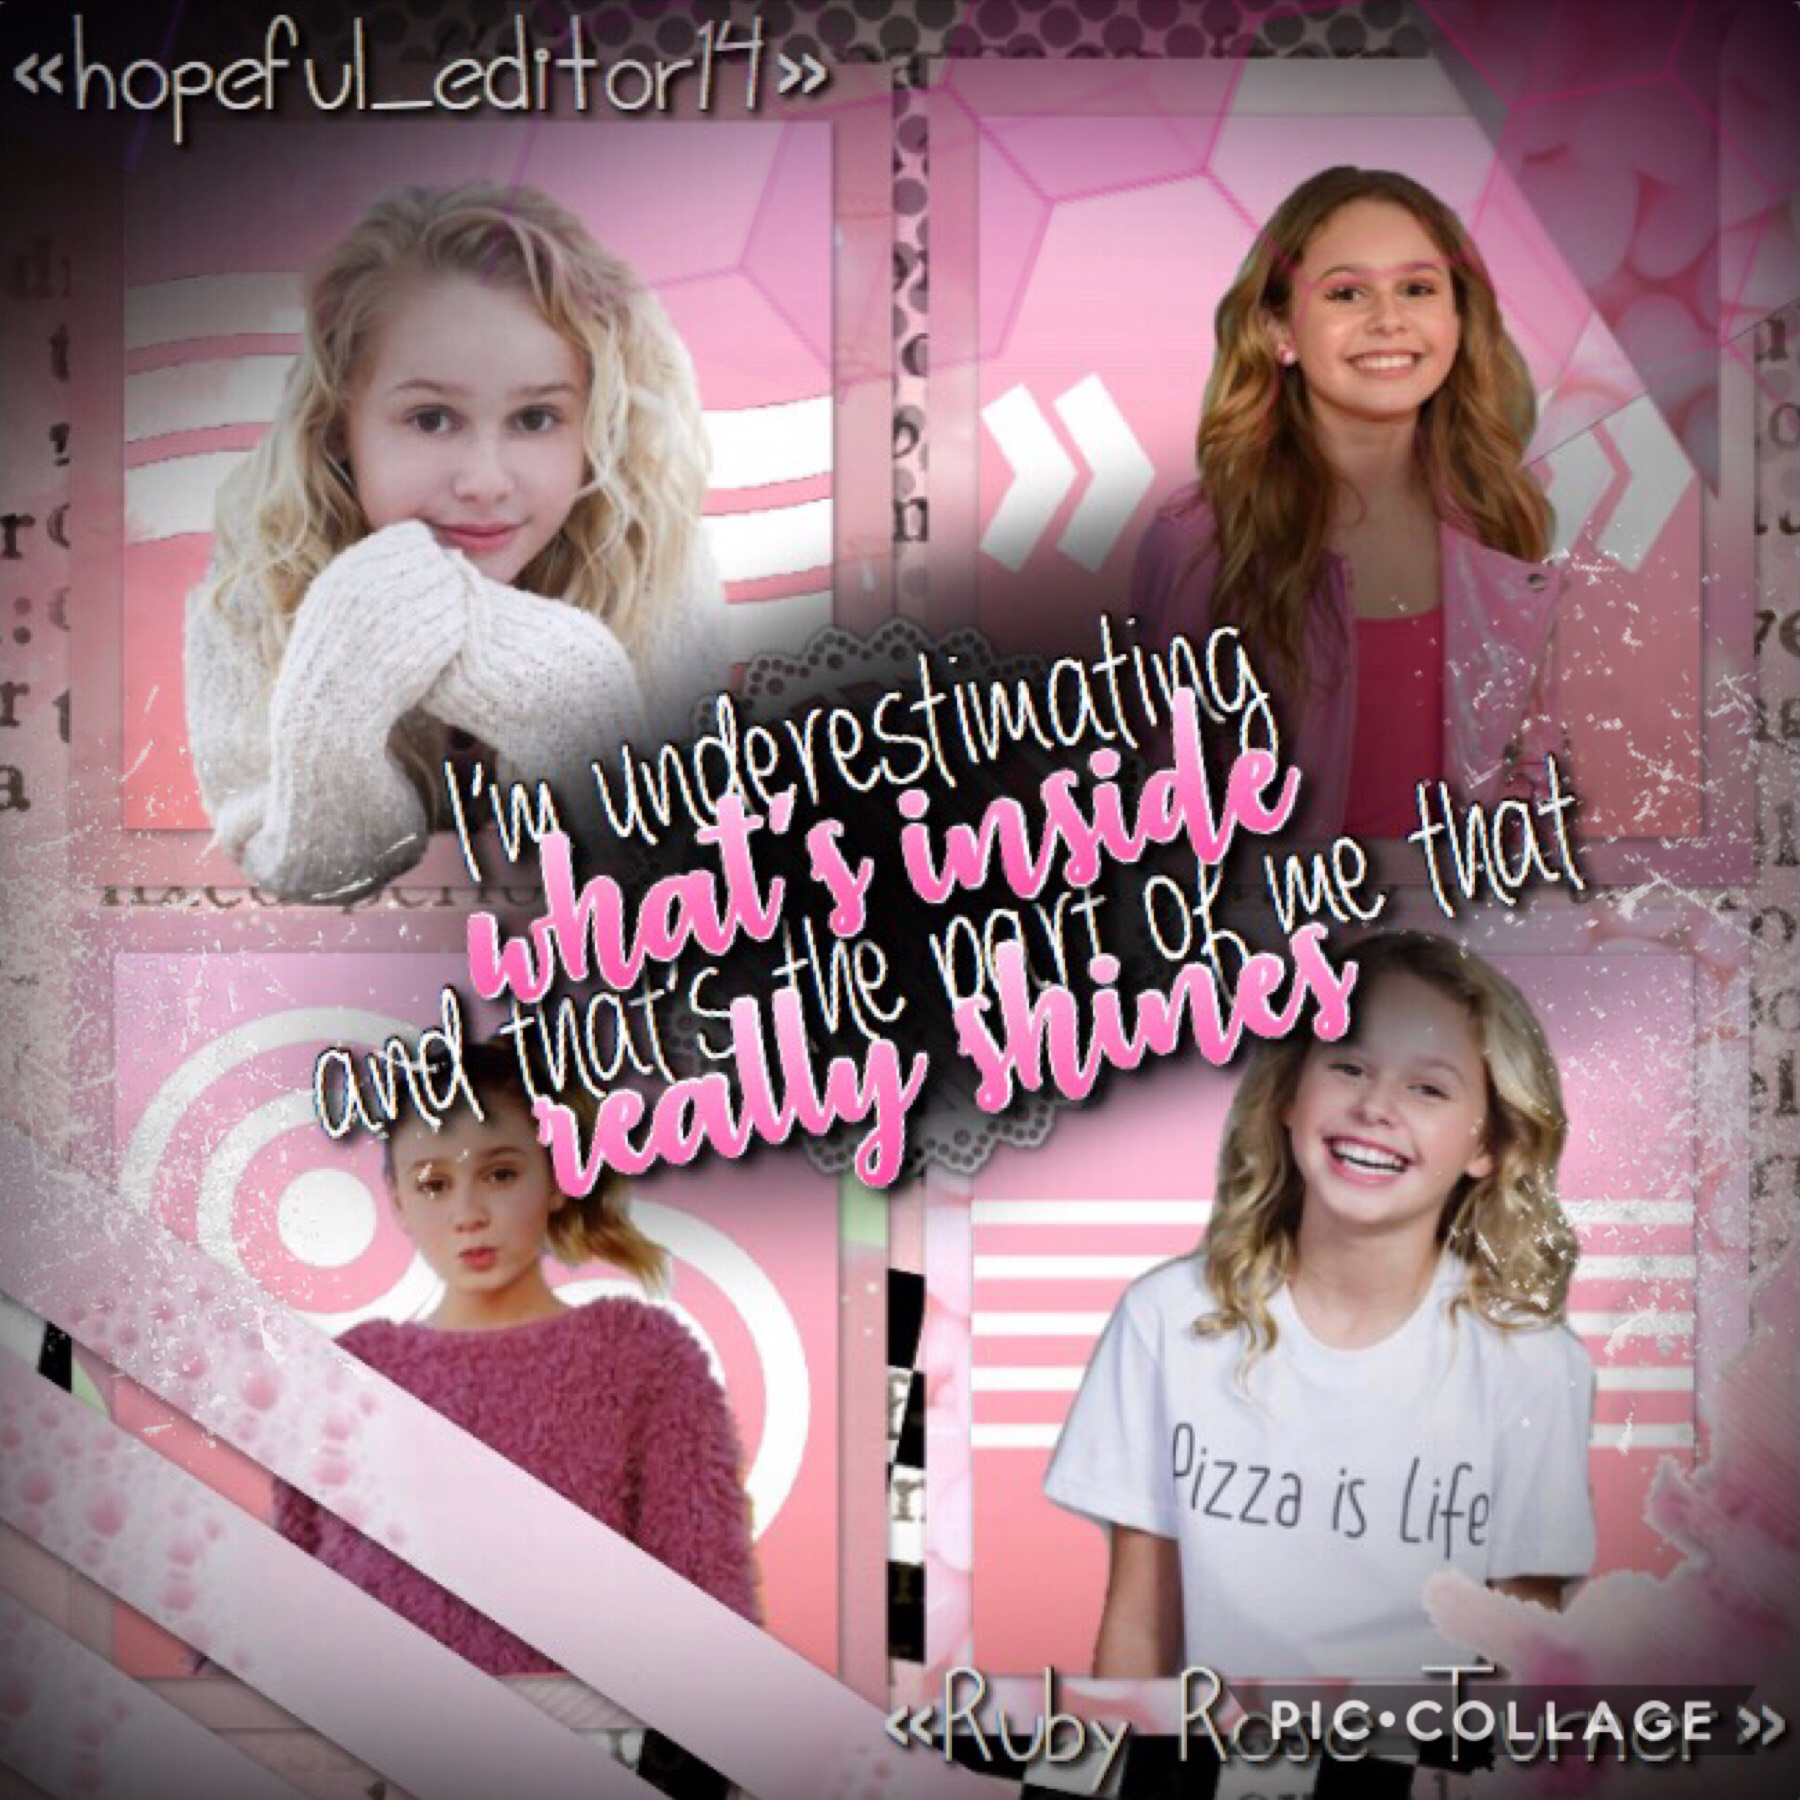 Ruby collage! (Tap)
Do you like this style? 
Sadly, I have school tomorrow. 
Have you started school yet? If not, when do you? I’ve been watching Hannah Montana the last few days and I’ve loved it.